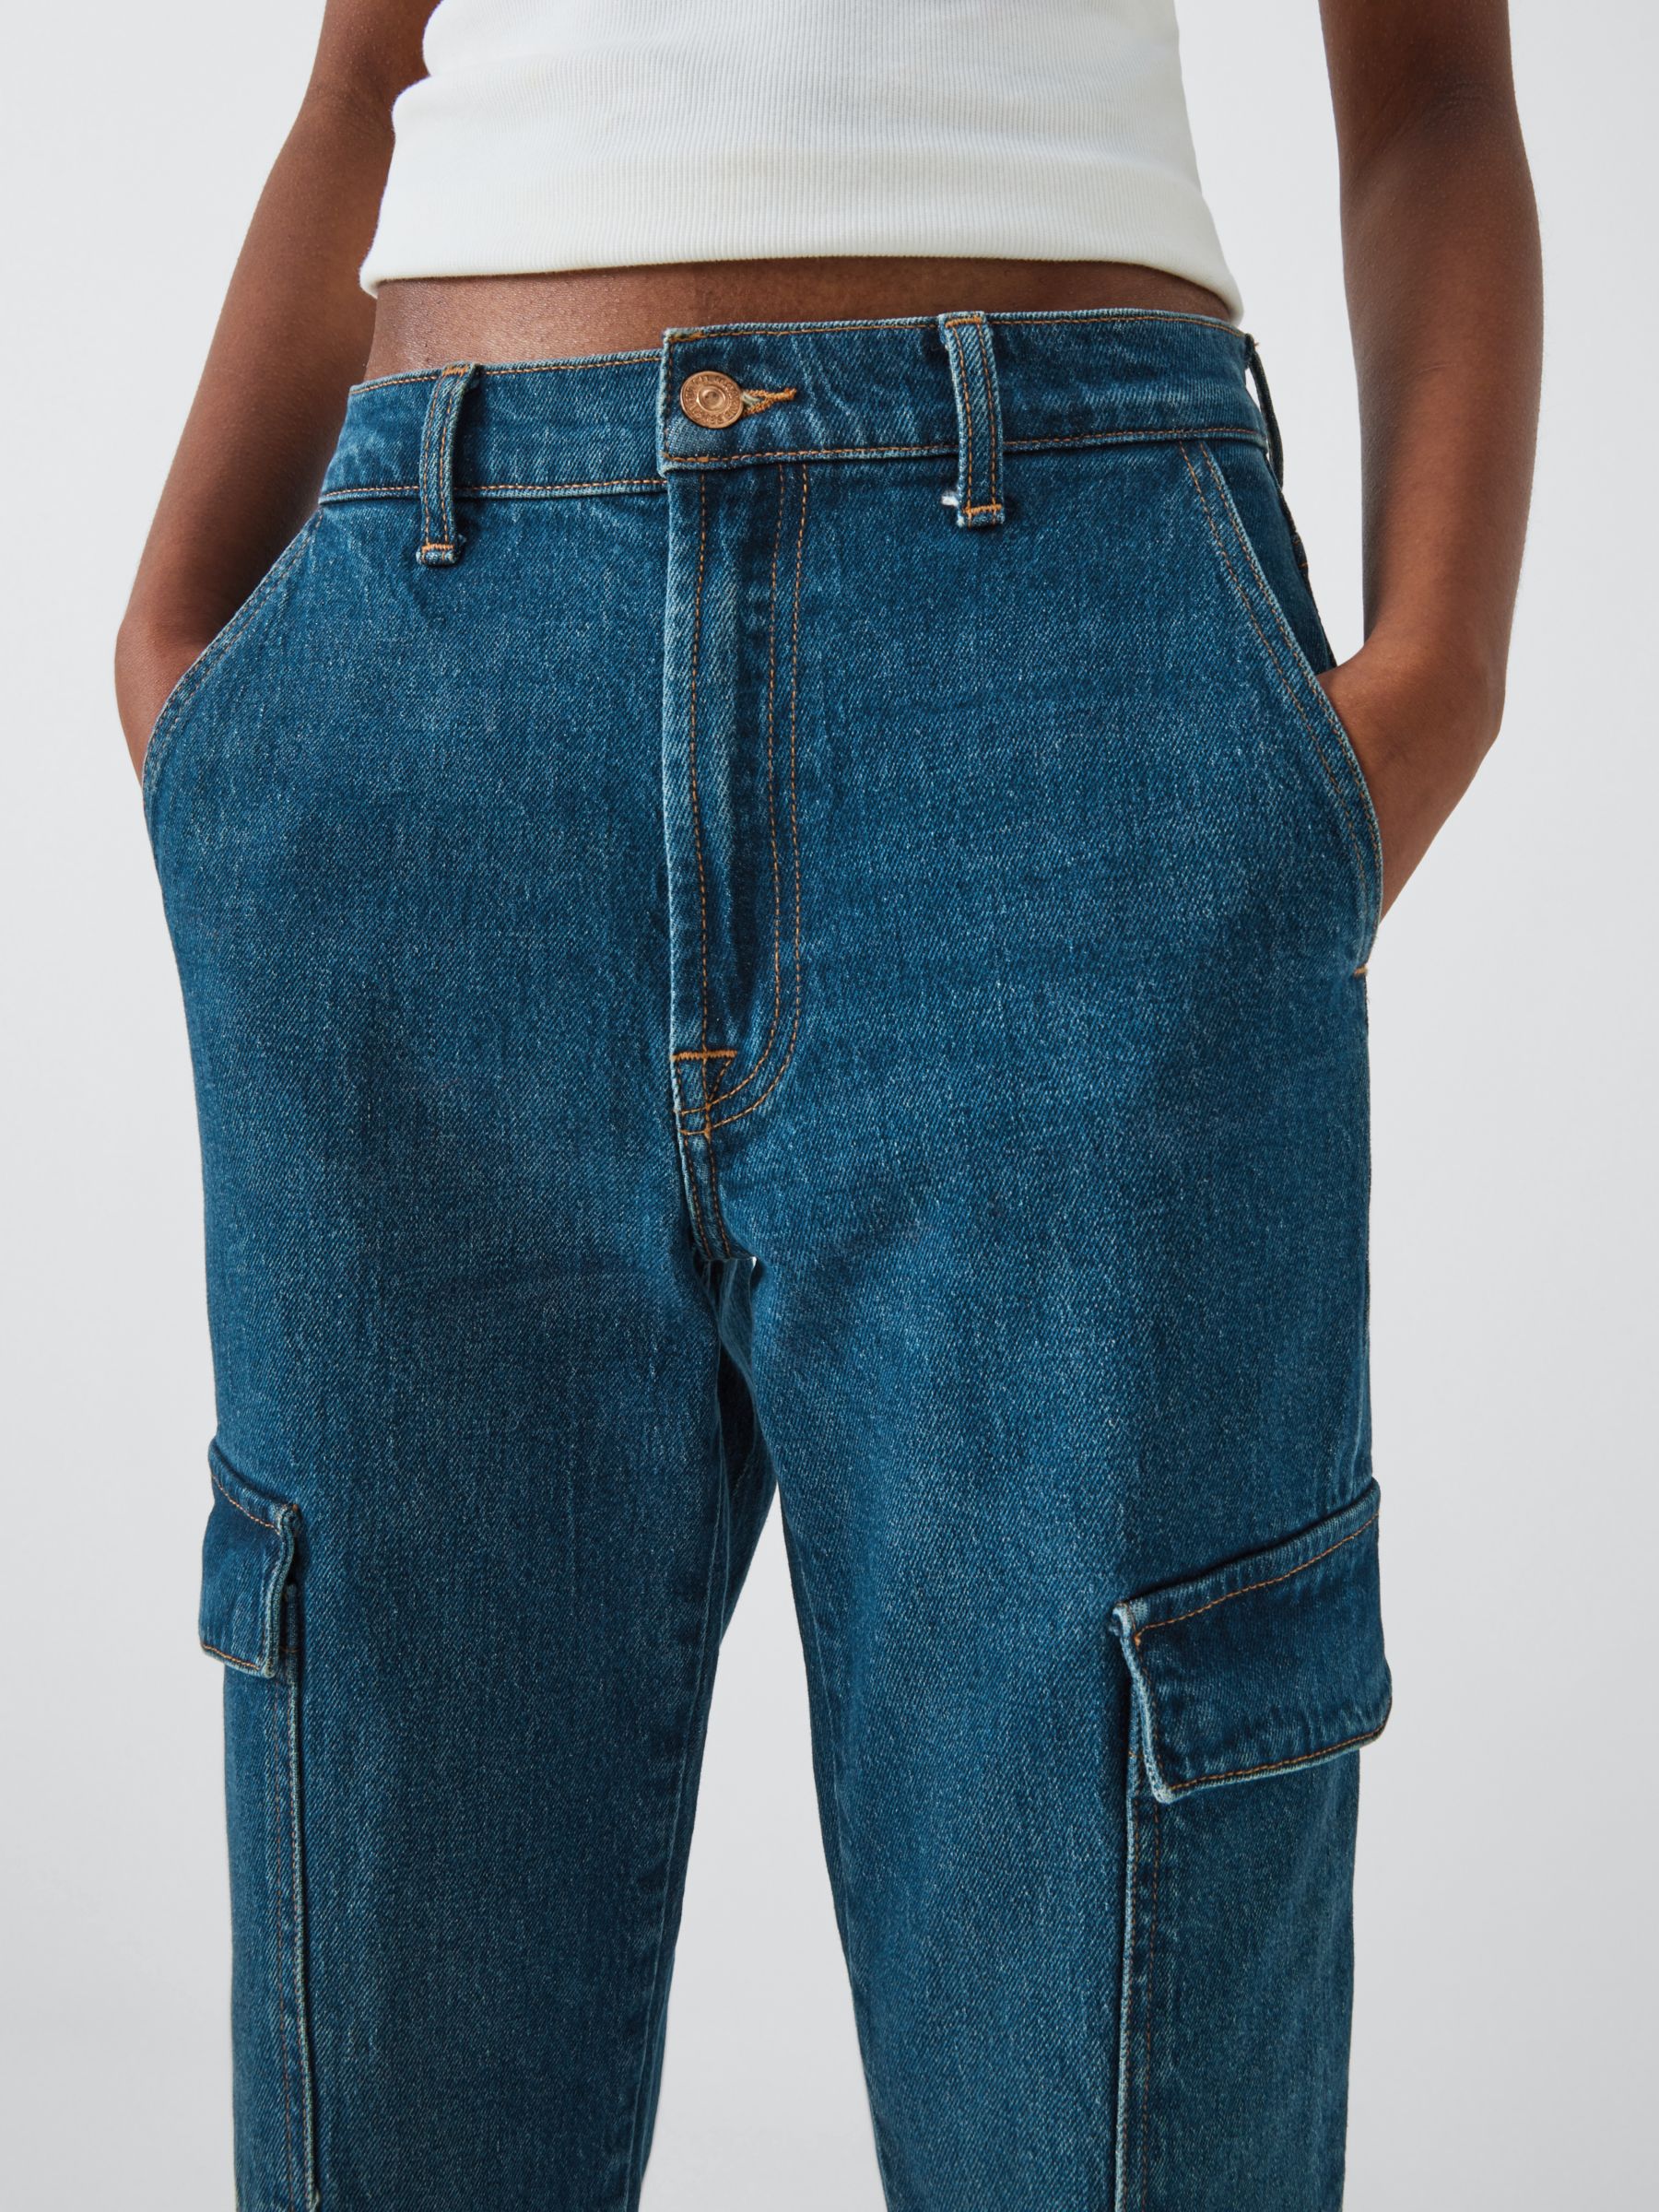 7 For All Mankind Cargo Logan High Waist Straight Cropped Jeans, Blue Bell, 30